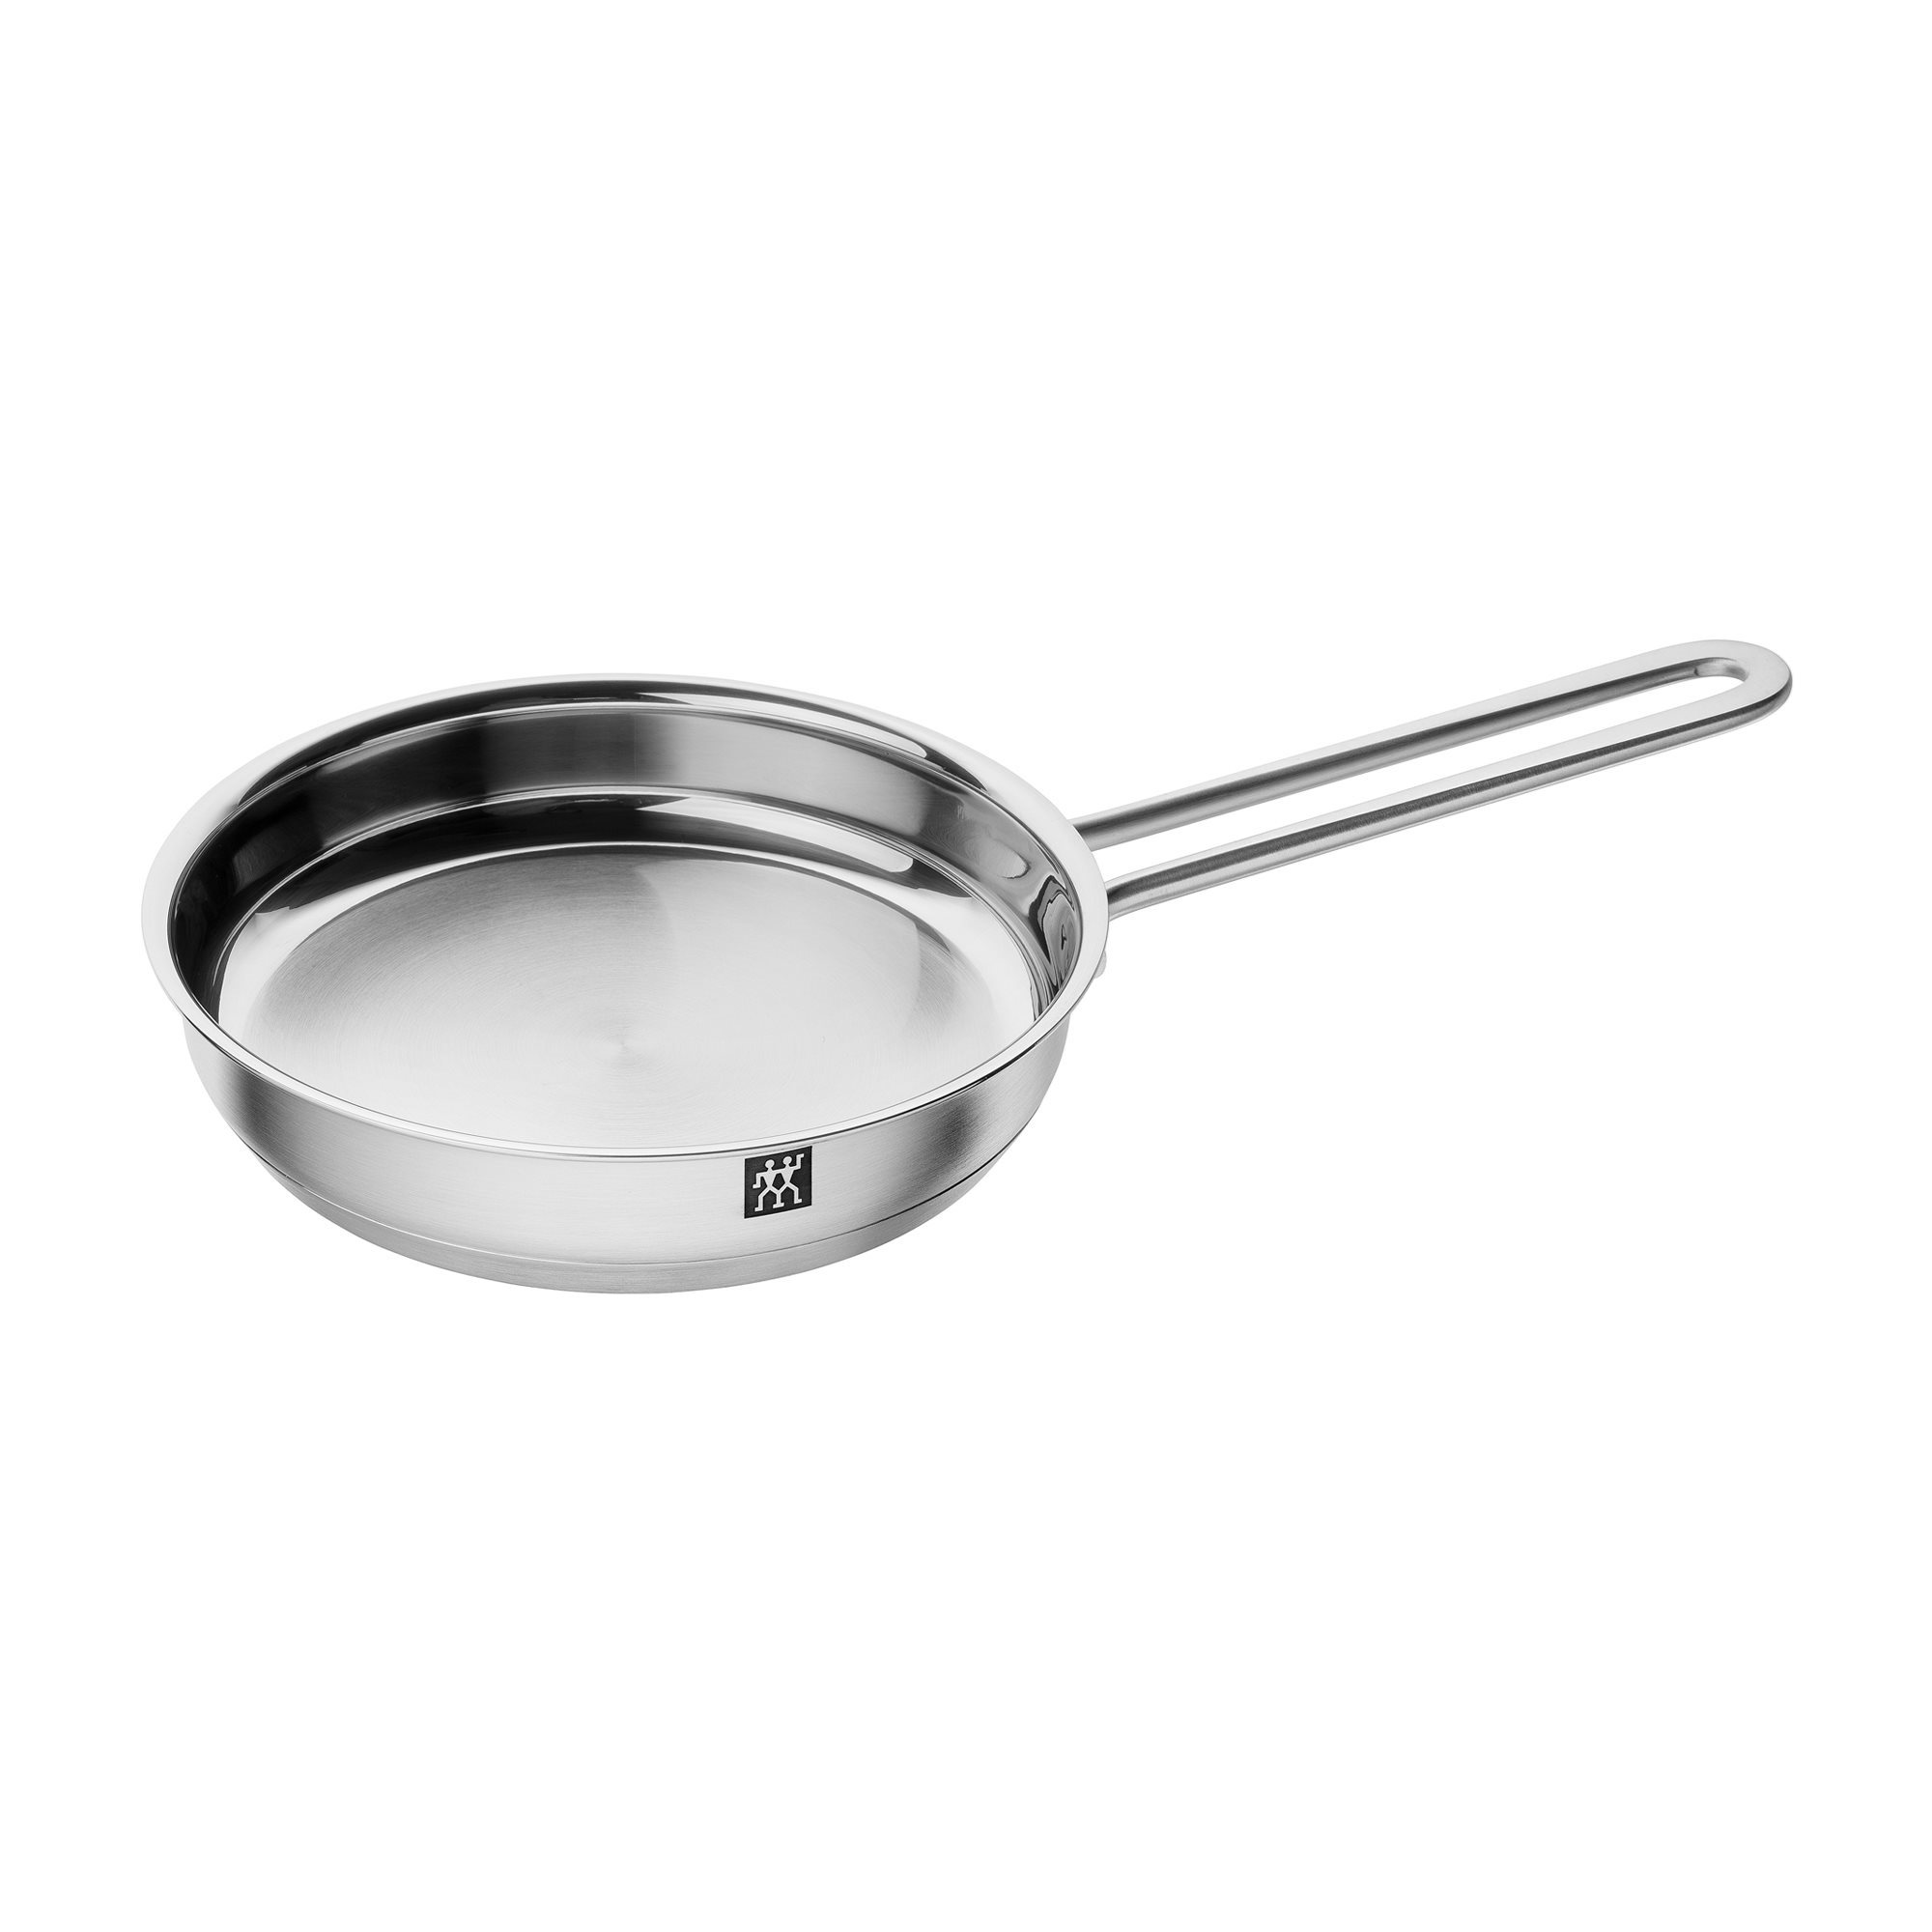 Stainless steel frying pan, 16 cm, <<Pico>> - Zwilling brand | KitchenShop